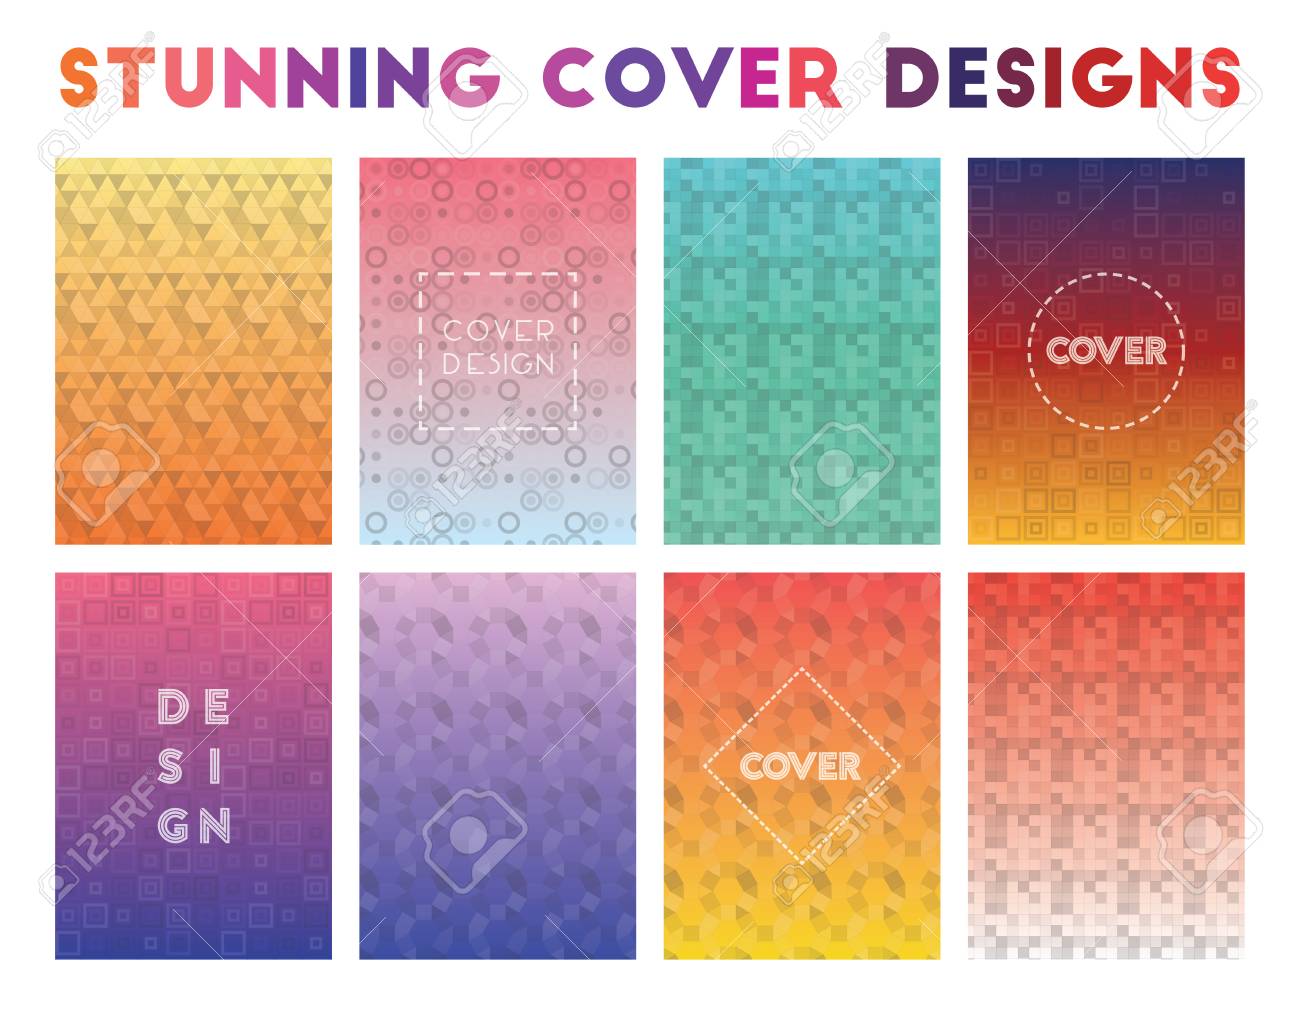 Stunning Cover Designs Admirable Geometric Patterns Bewitching